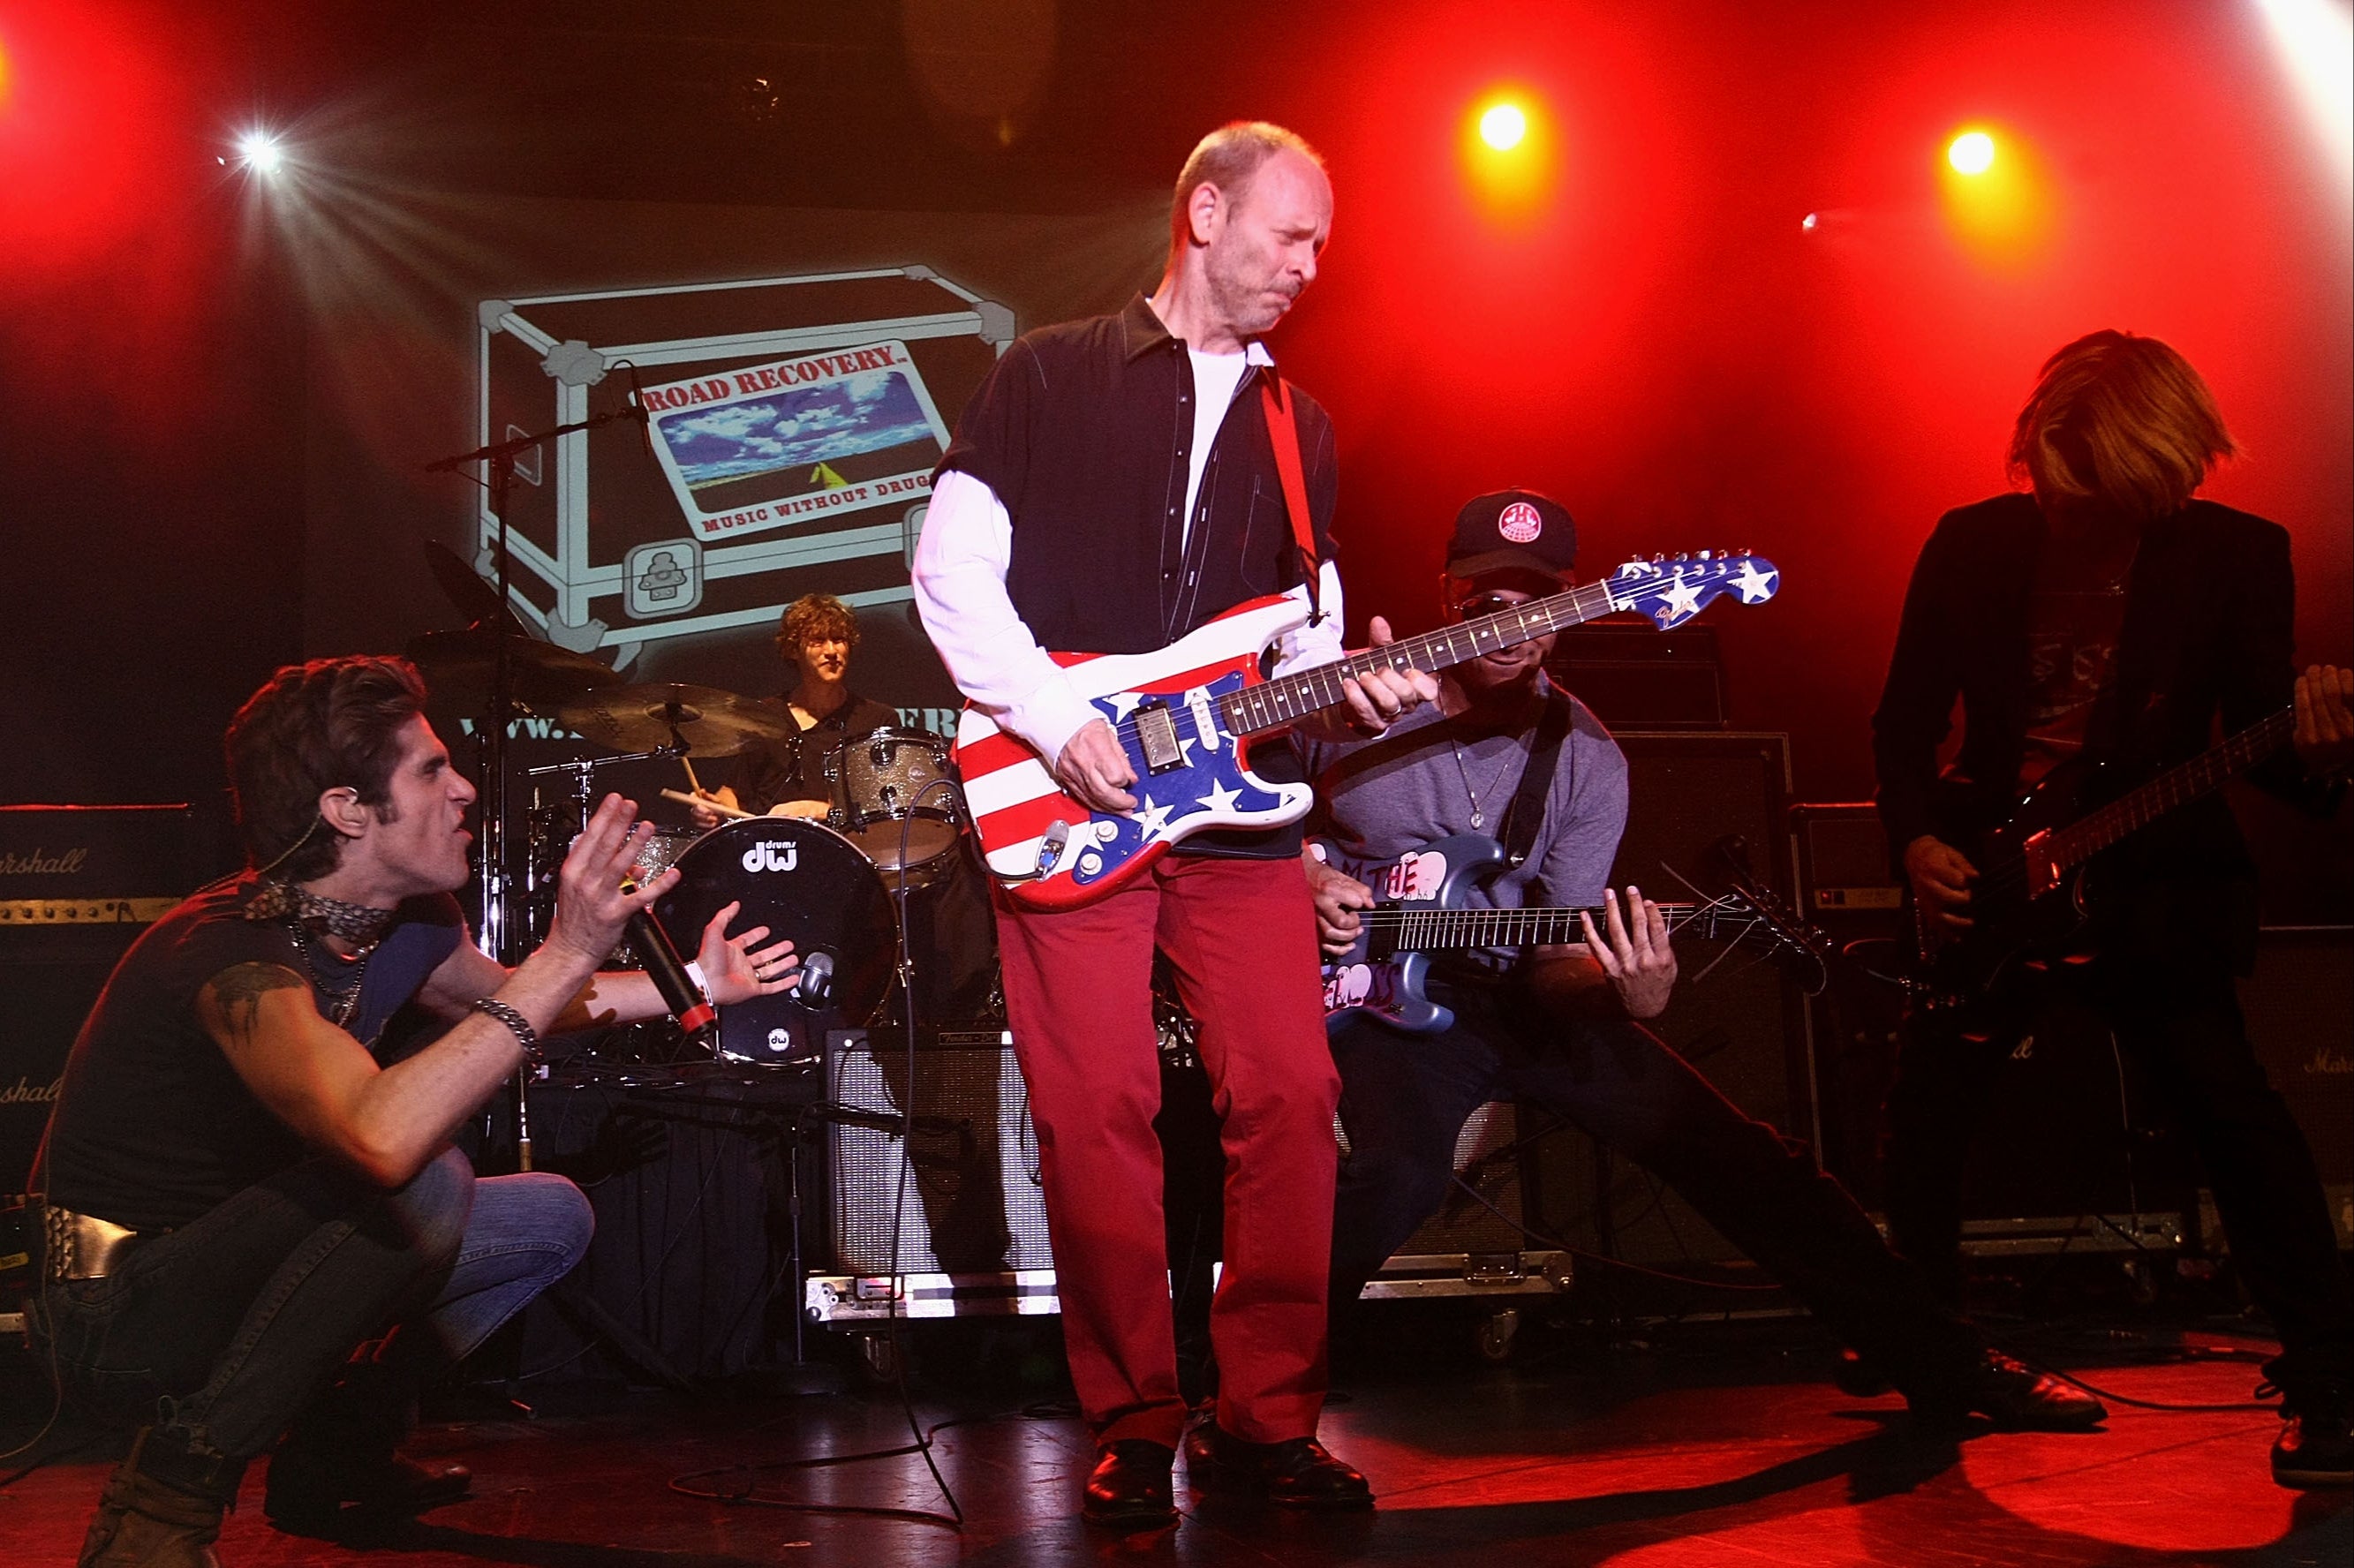 Wayne Kramer onstage in New York in 2009, surrounded by Perry Farrell, Tom Morello and Carl Restivo